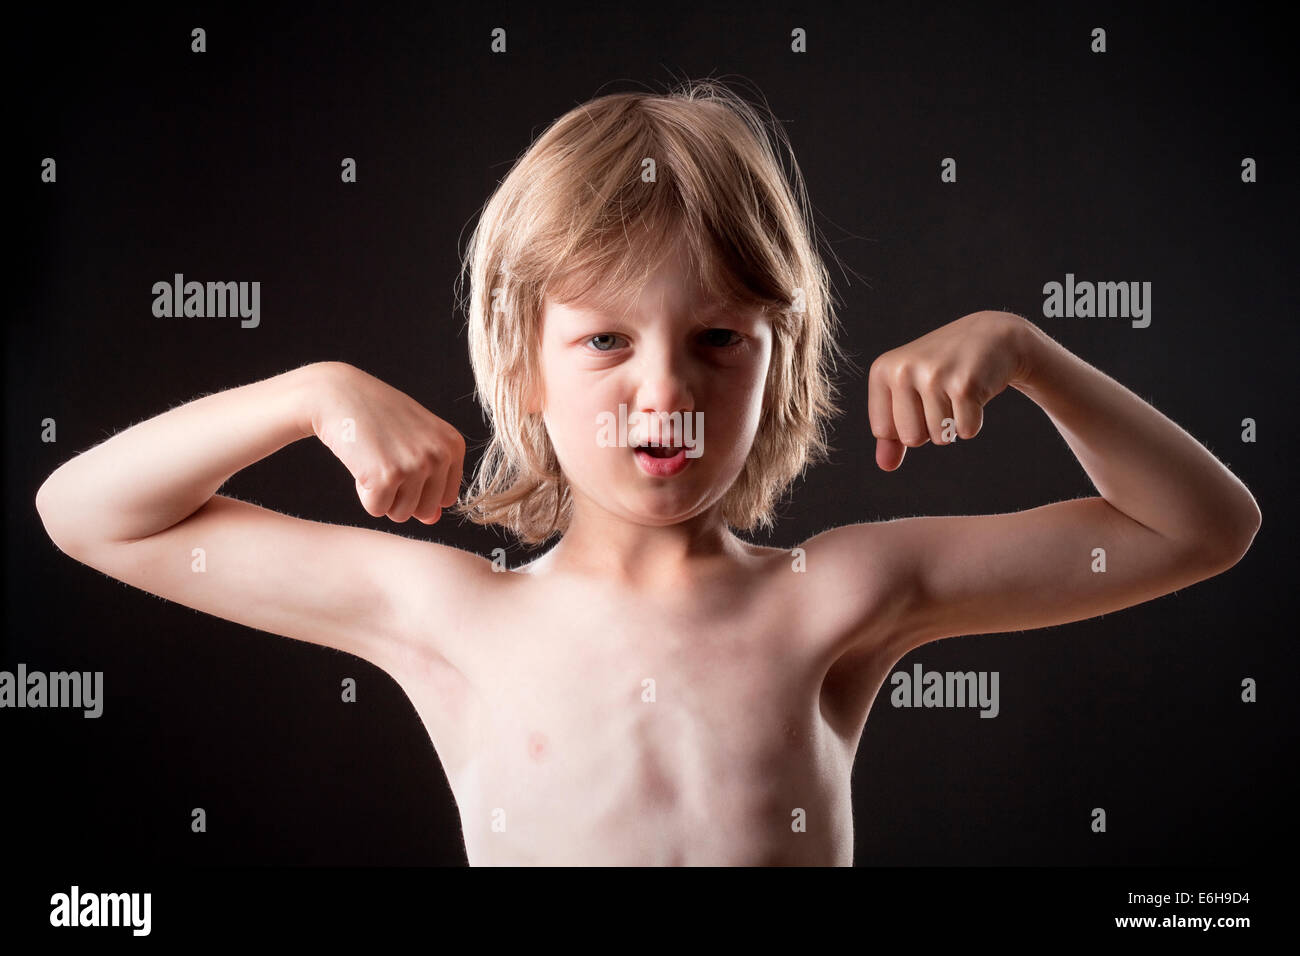 Boy with Blond Hair Showing his Muscles Stock Photo